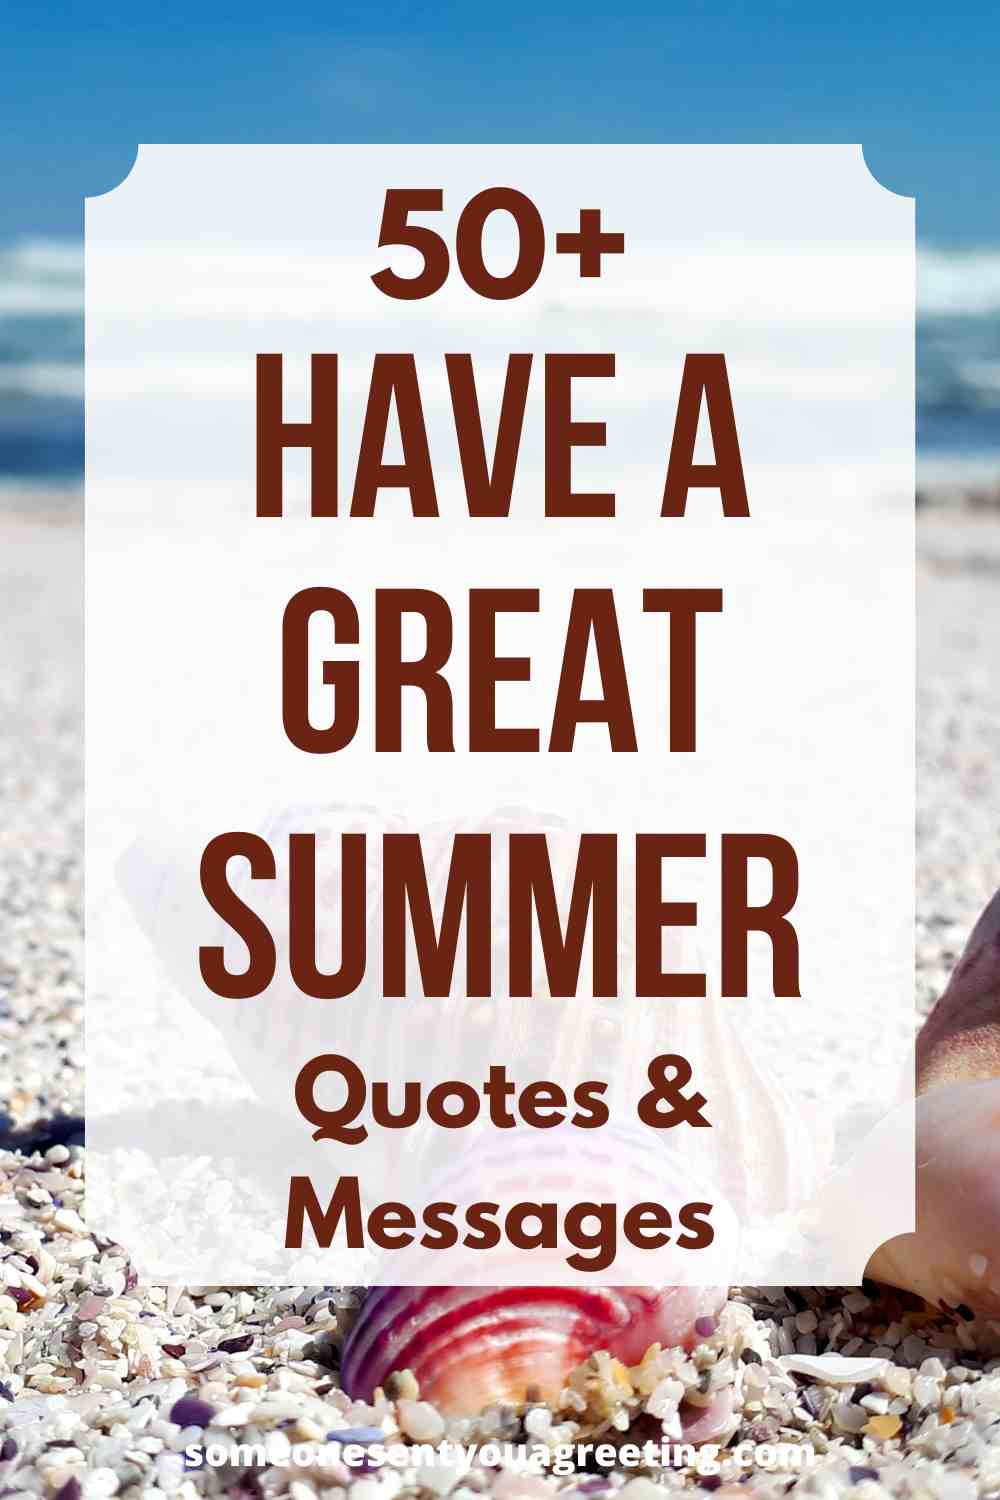 have a great summer quotes and messages